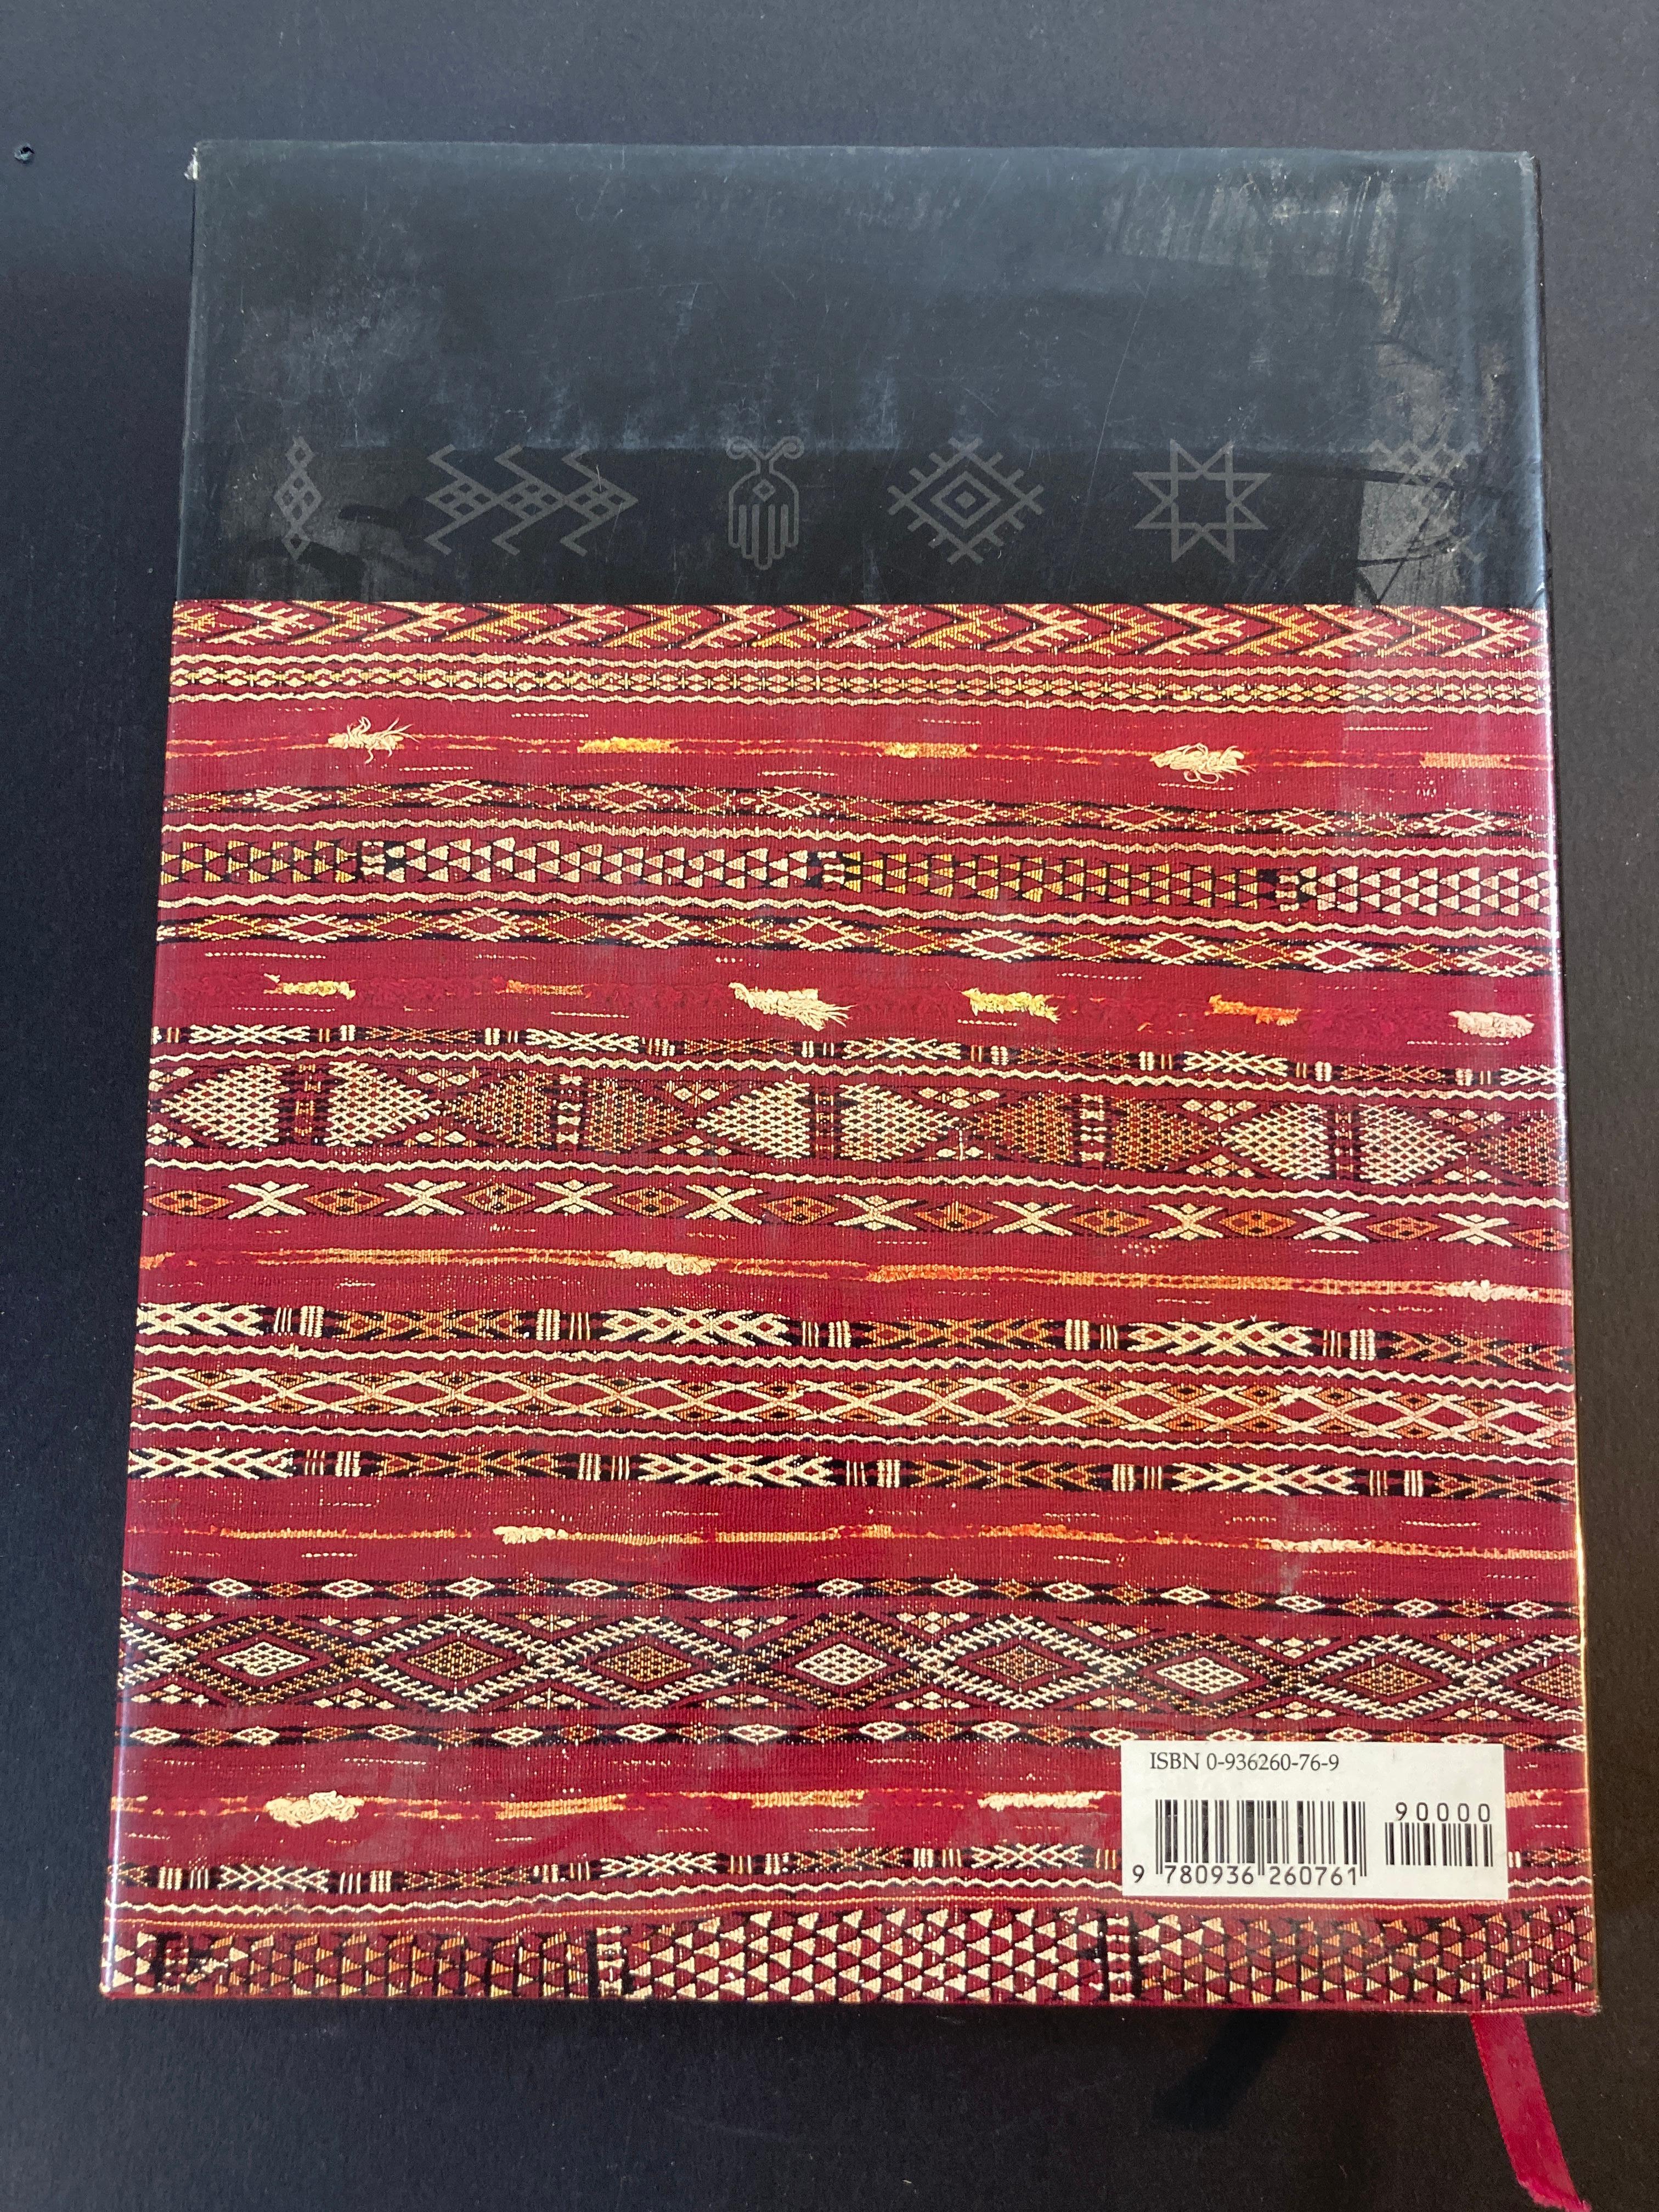 The Fabric of Moroccan Life Book by Ivo Grammet and Niloo Imami Paydar In Good Condition For Sale In North Hollywood, CA